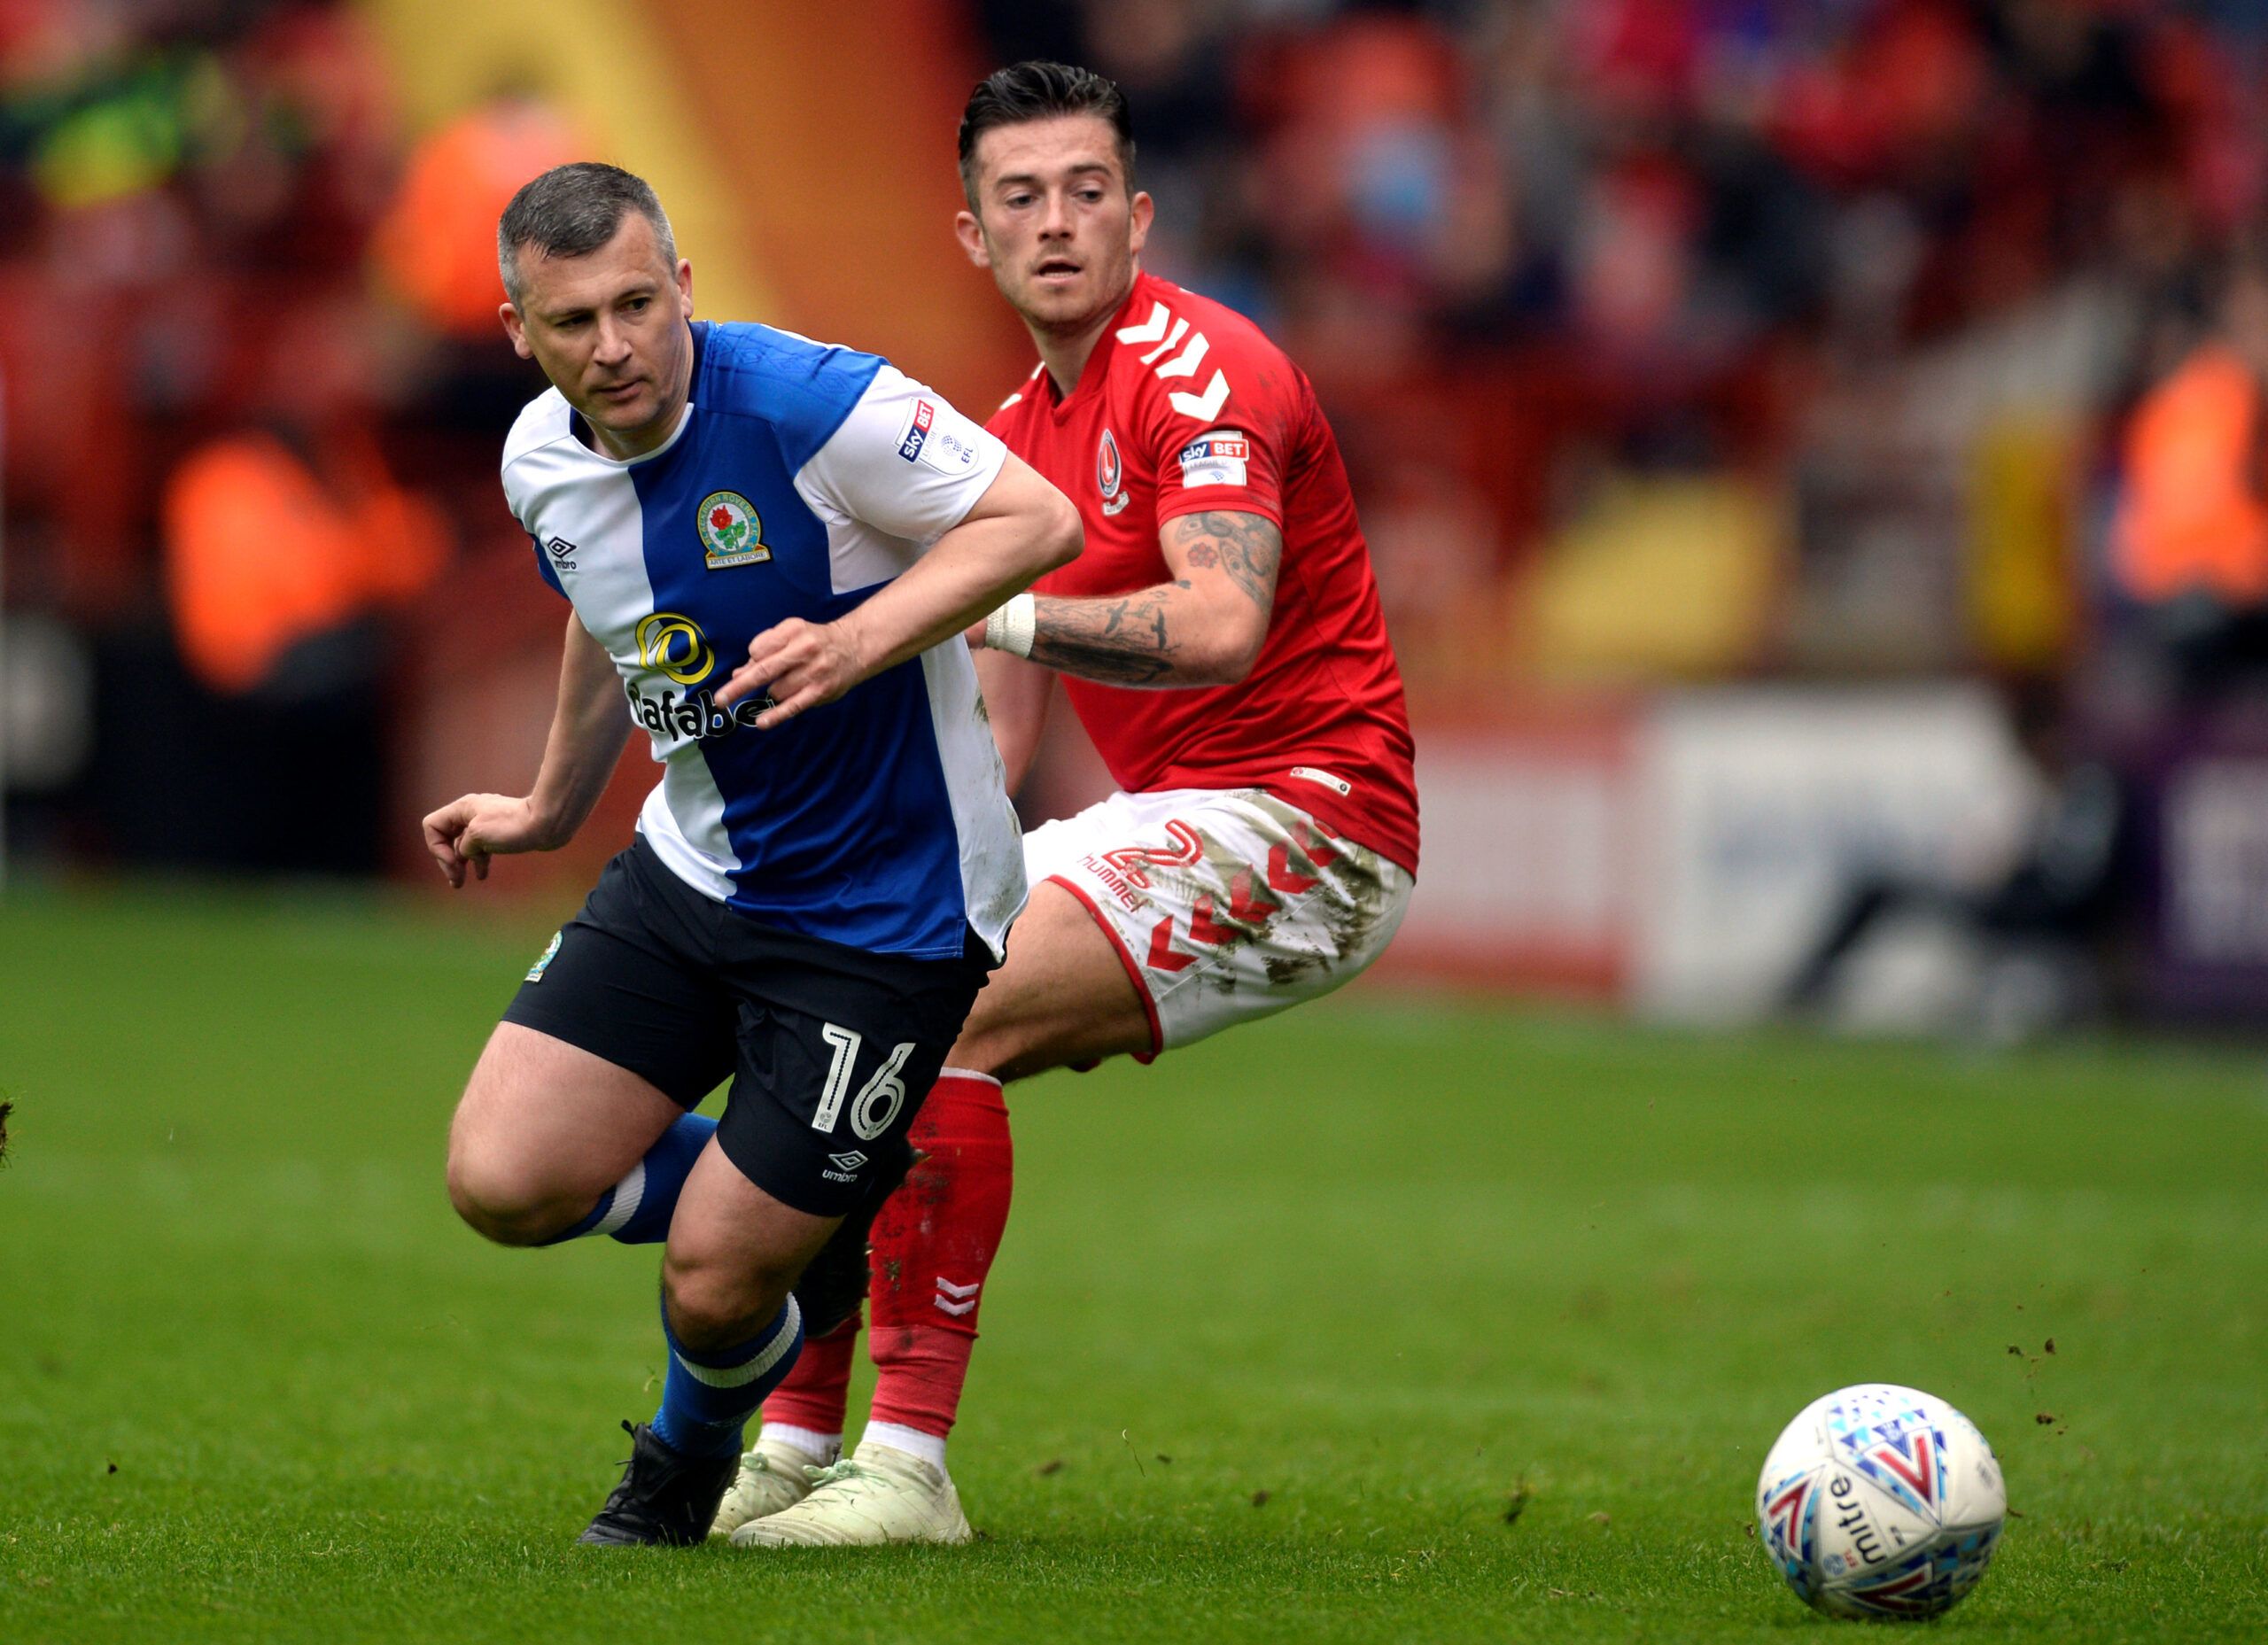 Soccer Football - Championship - Charlton Athletic v Blackburn Rovers - The Valley, London, Britain - April 28, 2018  Charlton Athletic's Lewis Page in action with Blackburn Rovers' Paul Caddis  Action Images/Adam Holt  EDITORIAL USE ONLY. No use with unauthorized audio, video, data, fixture lists, club/league logos or 